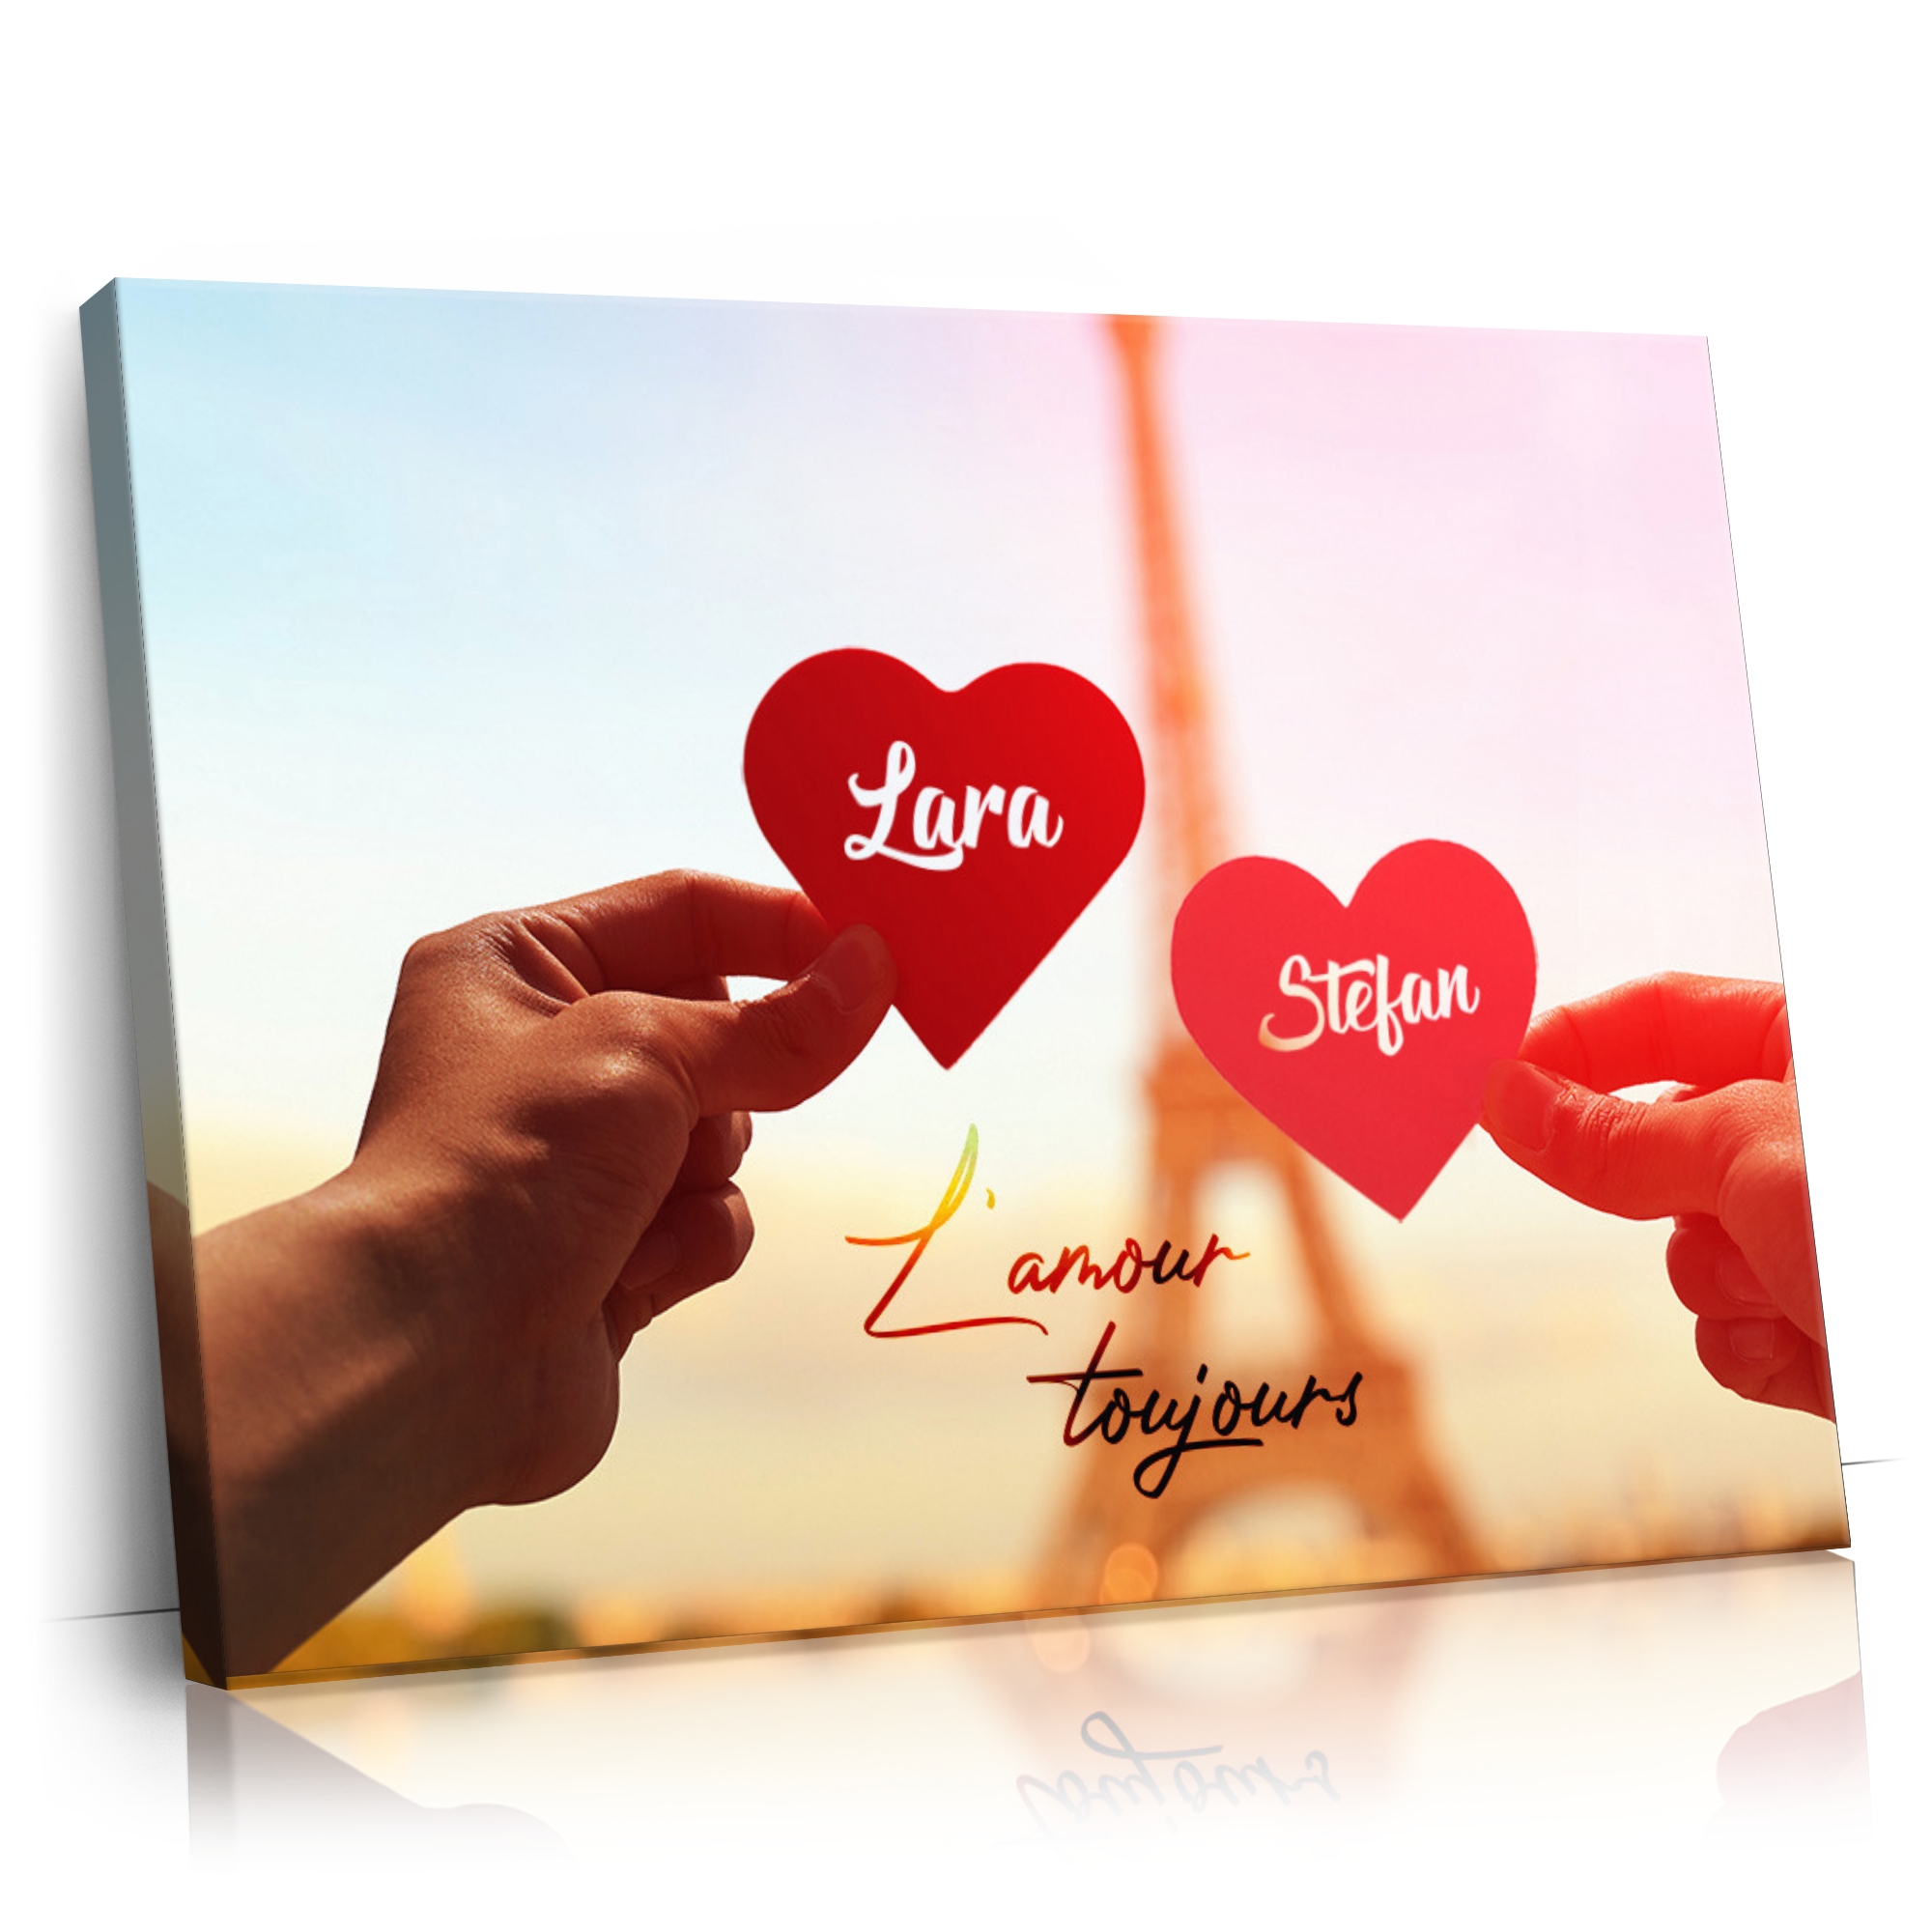 Personalisierbares Geschenk L'amour Toujours